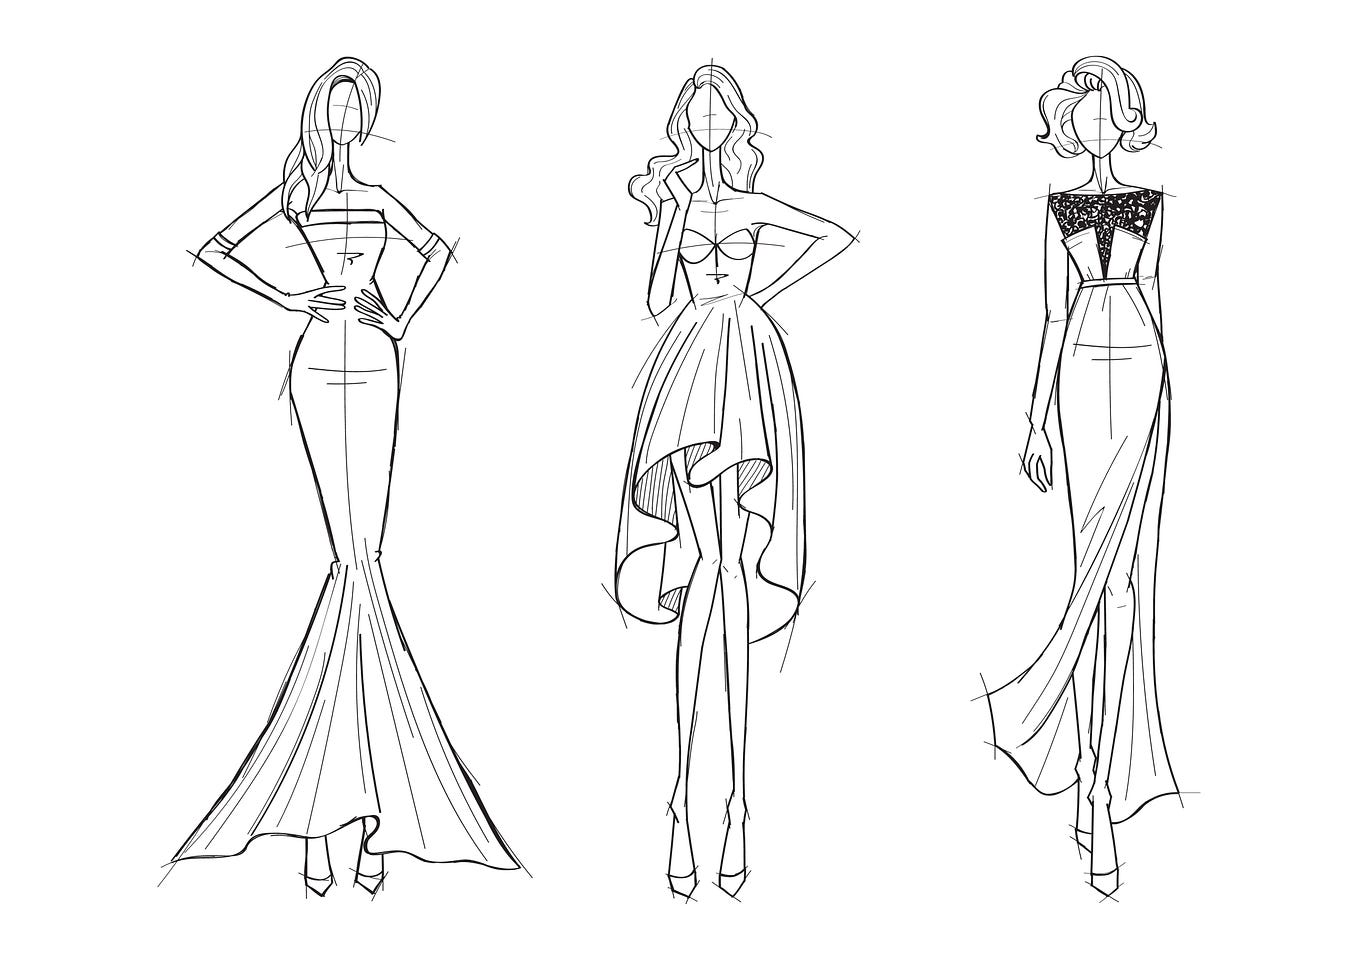 3 sketches of models wearing cocktail dresses.